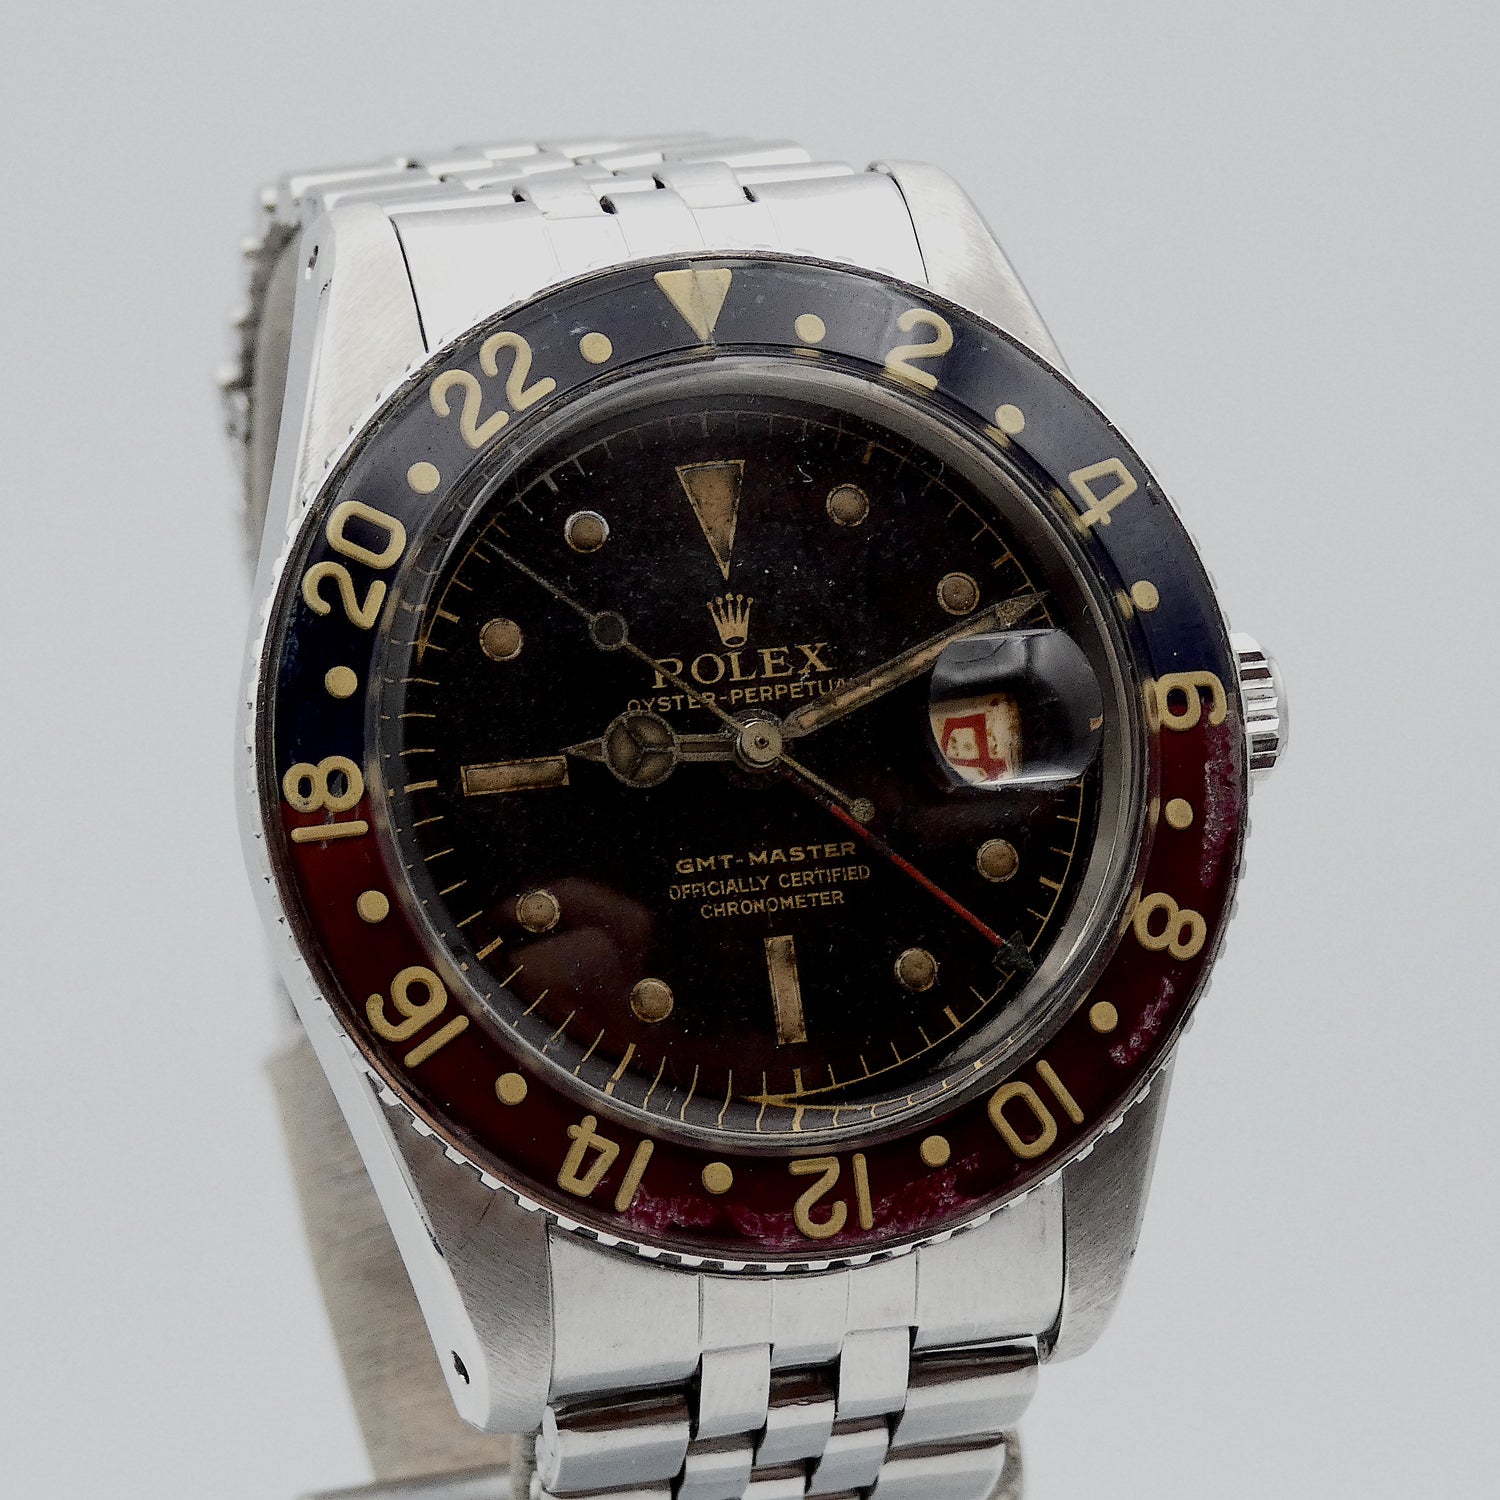 SOLD GMT-Master Pussy Galore / 1959 Bachelite